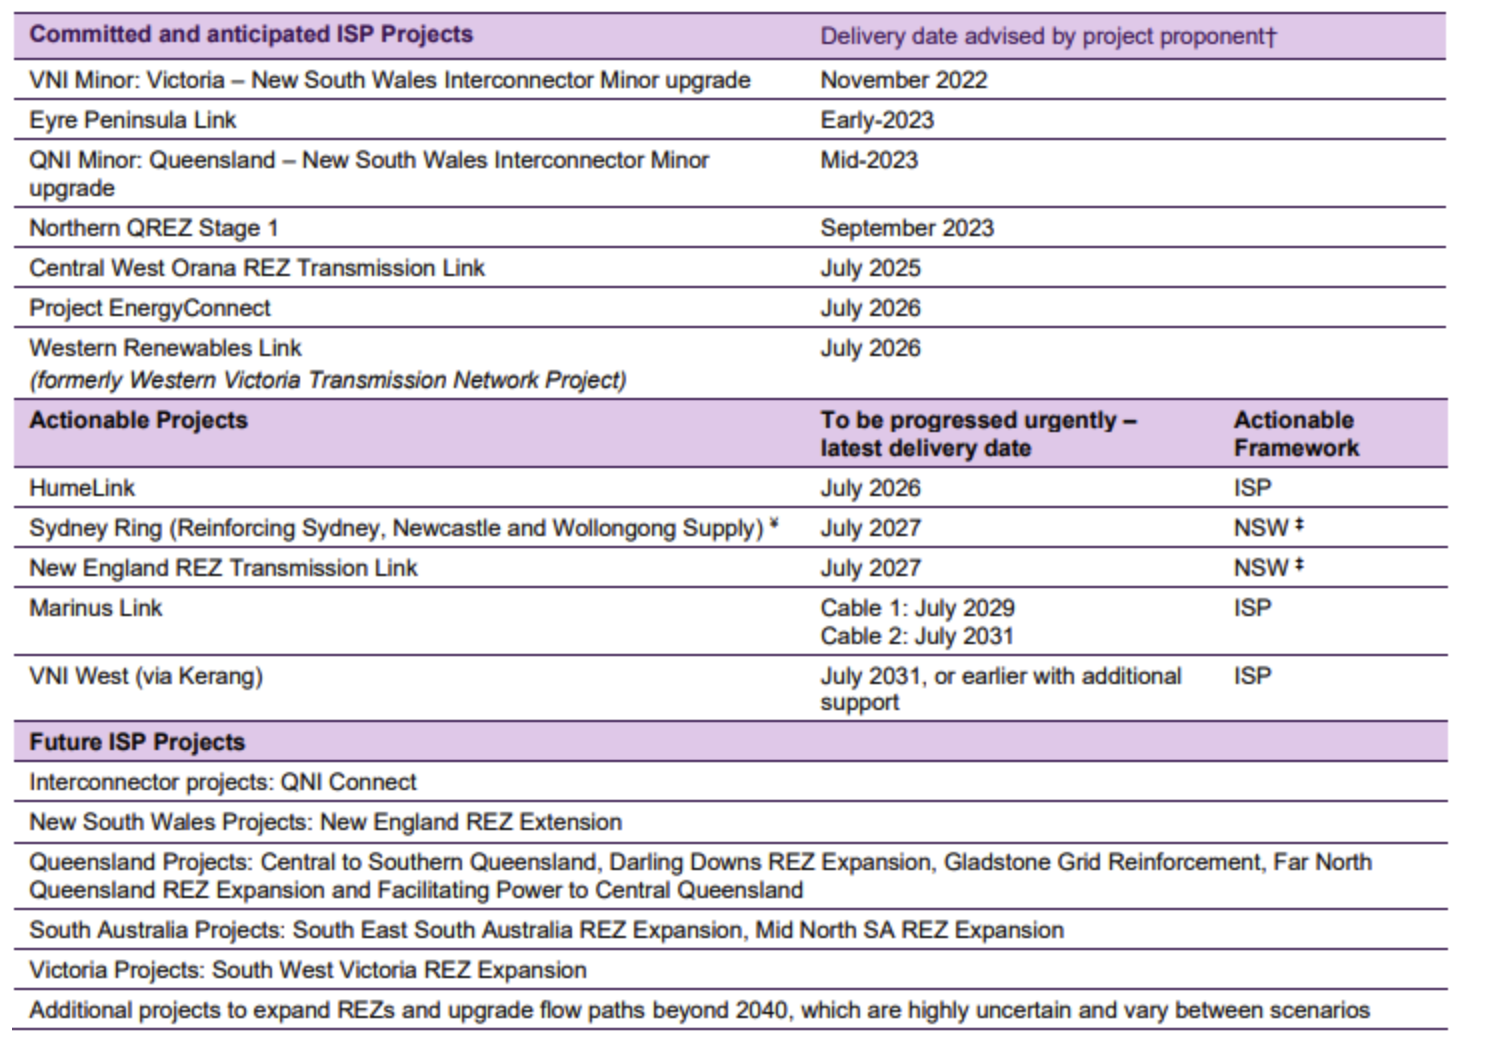 Source: AEMO, 2022 Integrated System Plan (ISP)